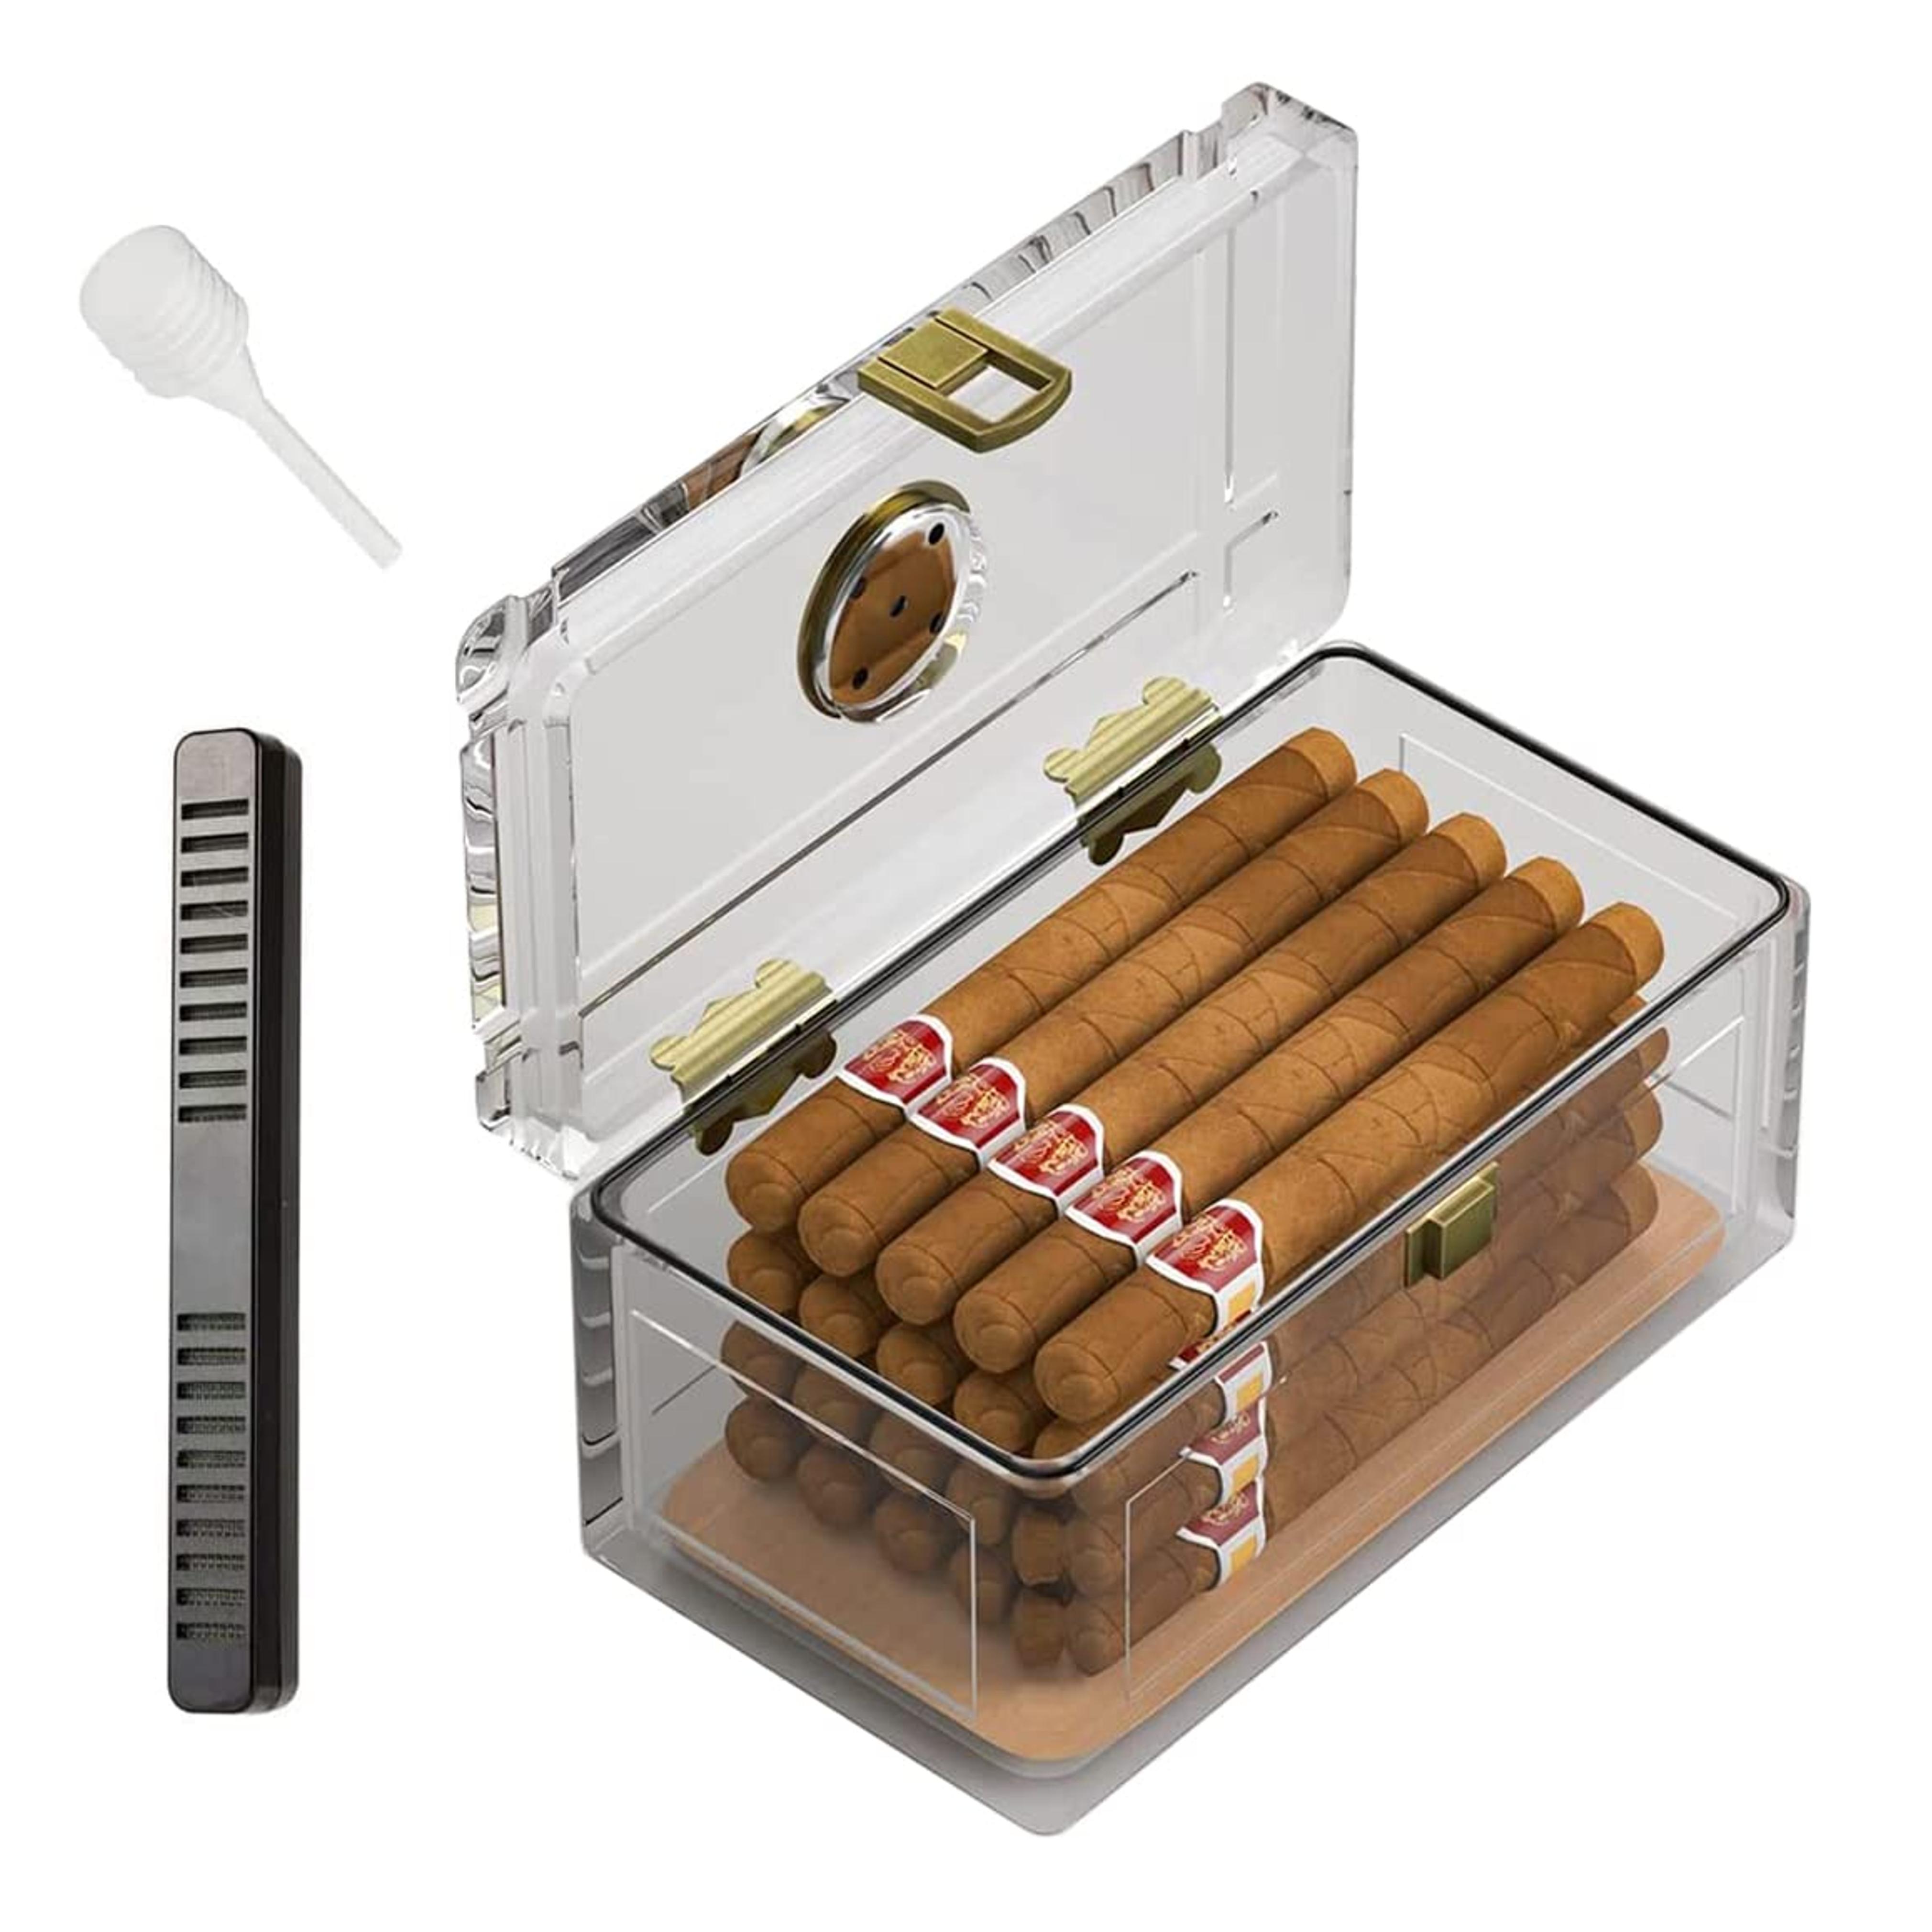 Amazon.com: TISFA Acrylic Cigar Humidor with Humidifier and Hygrometer, Desktop Cigar Case Box That can Hold About 15-20 Cigars (S) : Health & Household